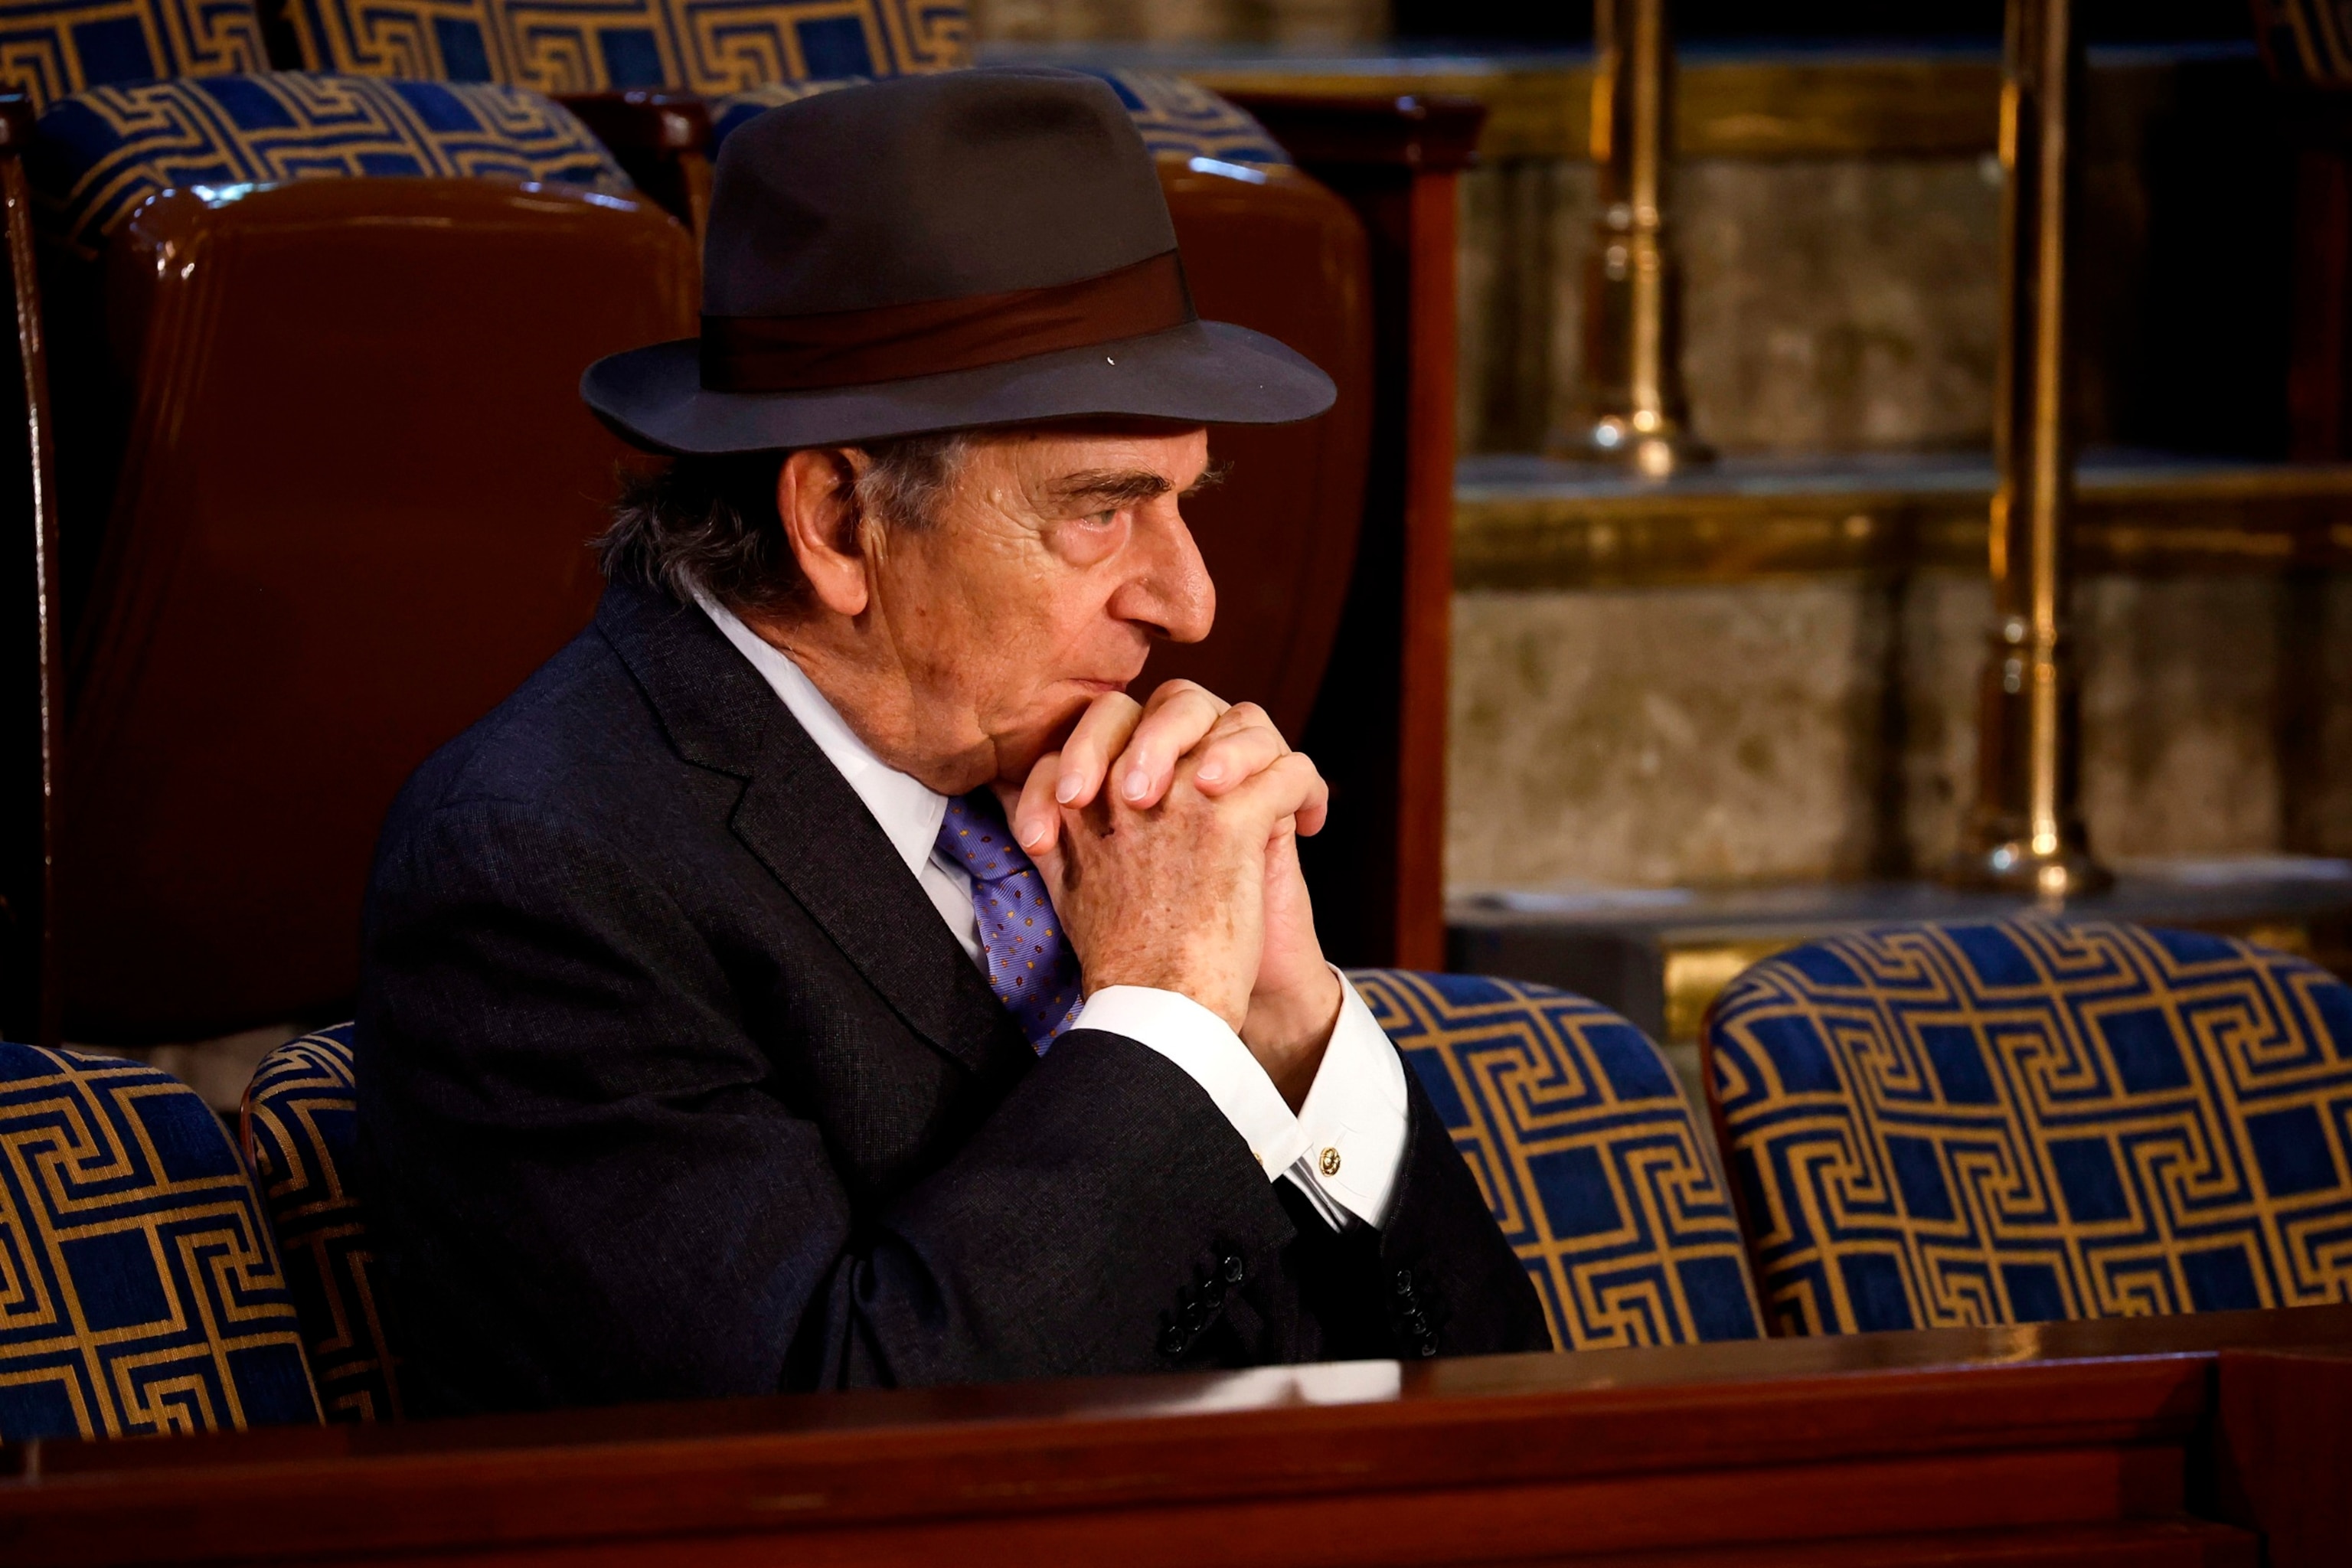 PHOTO: Paul Pelosi waits for the start of President Joe Biden's State of the Union address in the House Chambers of the U.S. Capitol in Washington, D.C., Feb. 07, 2023.